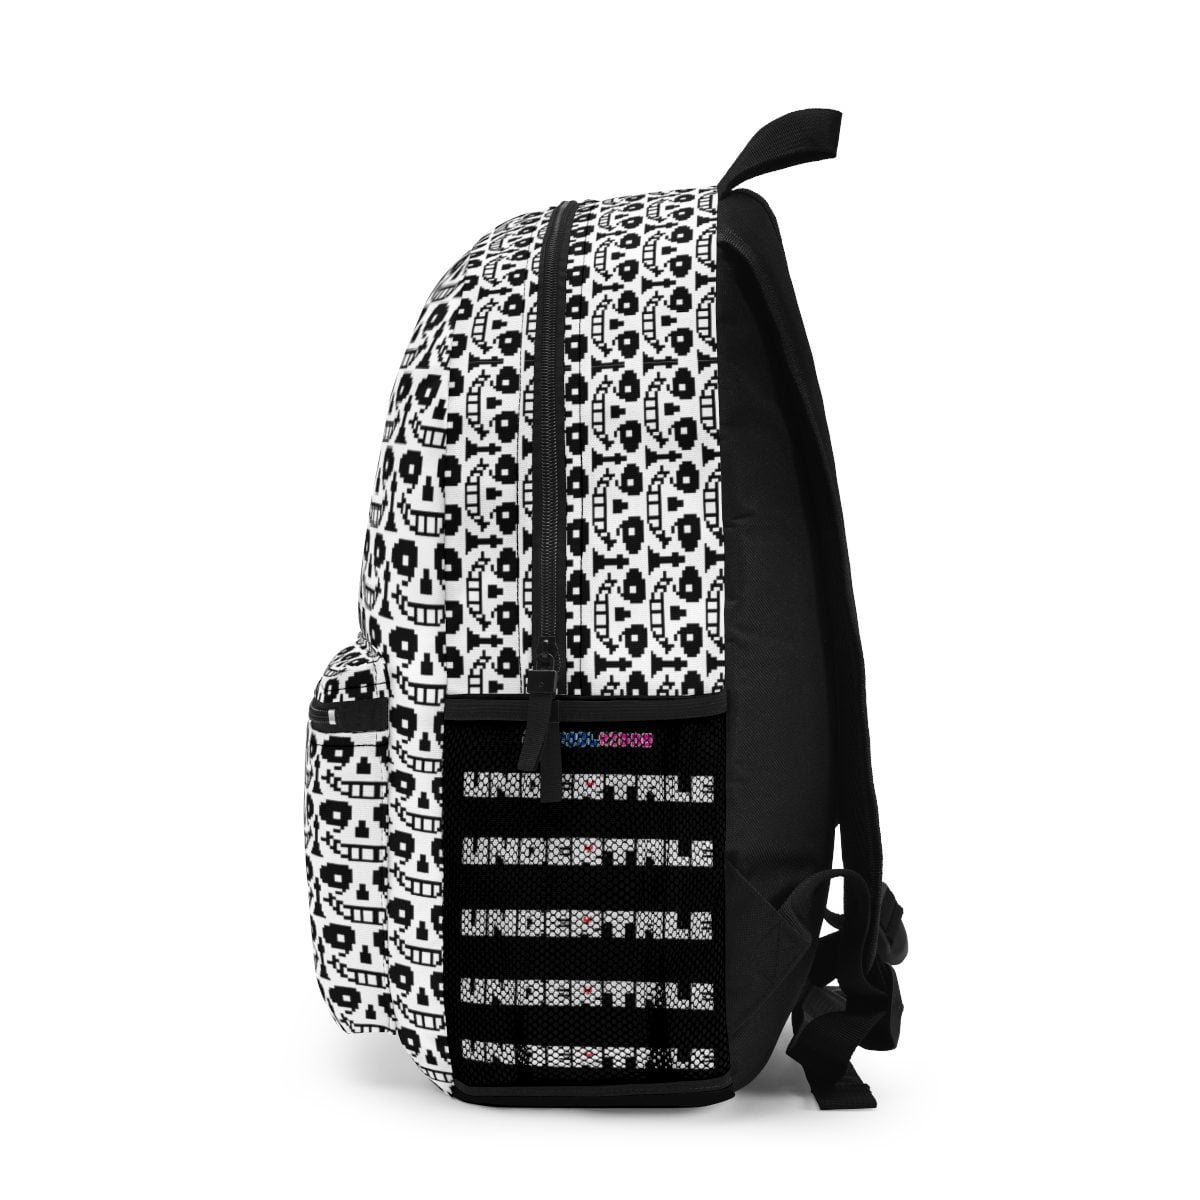 Undertale 2 (Shadows of Time) Monochromatic Backpack Cool Kiddo 14